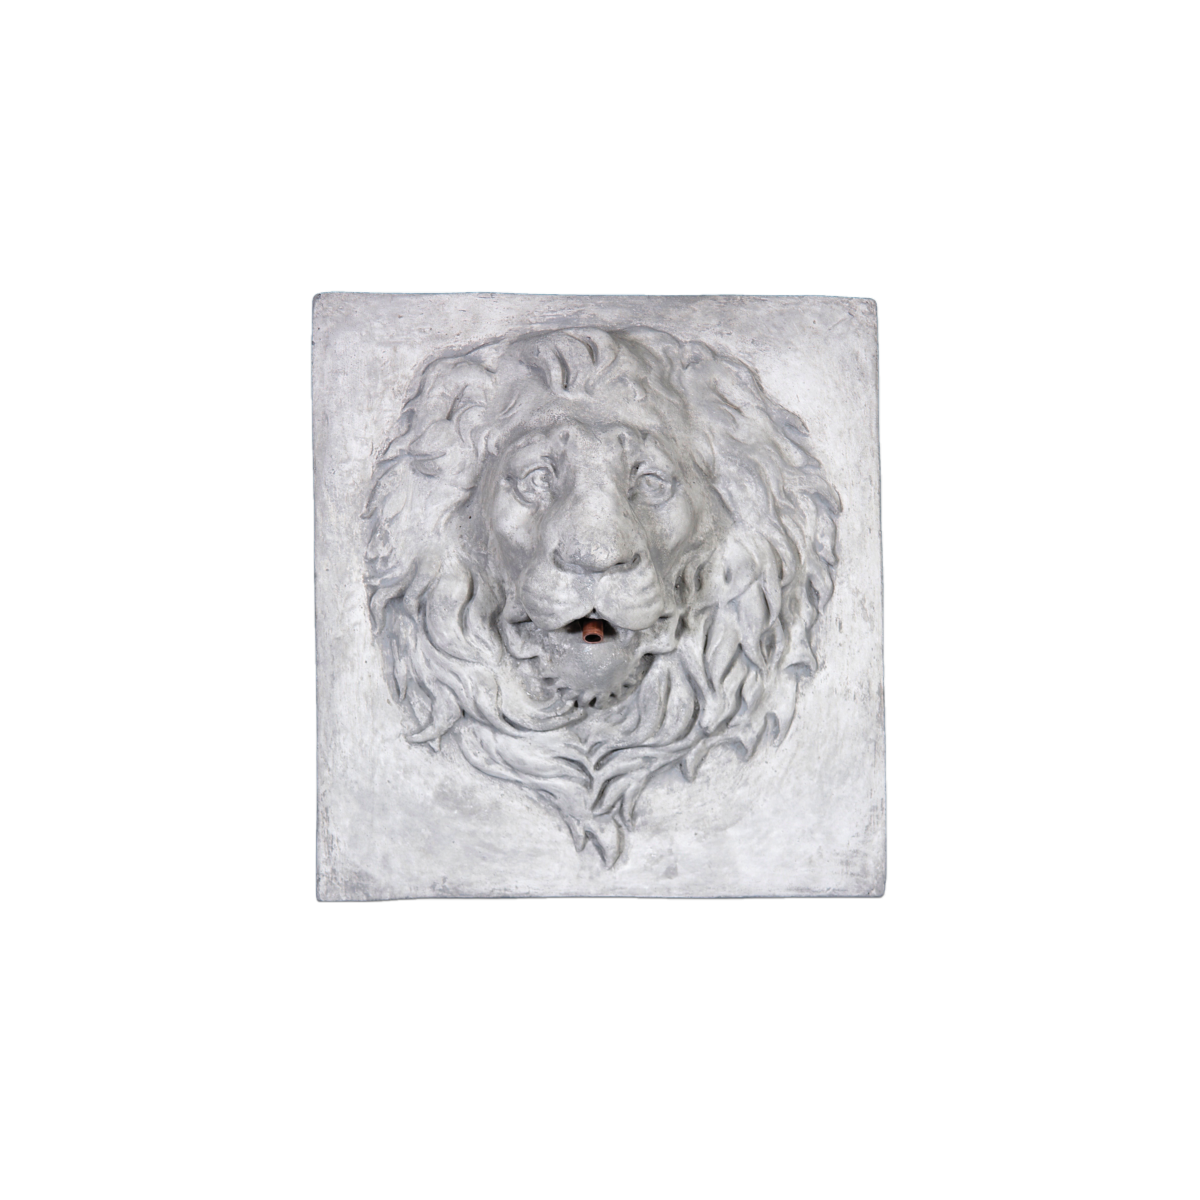 Featured image for “Donatella Lion Mask”